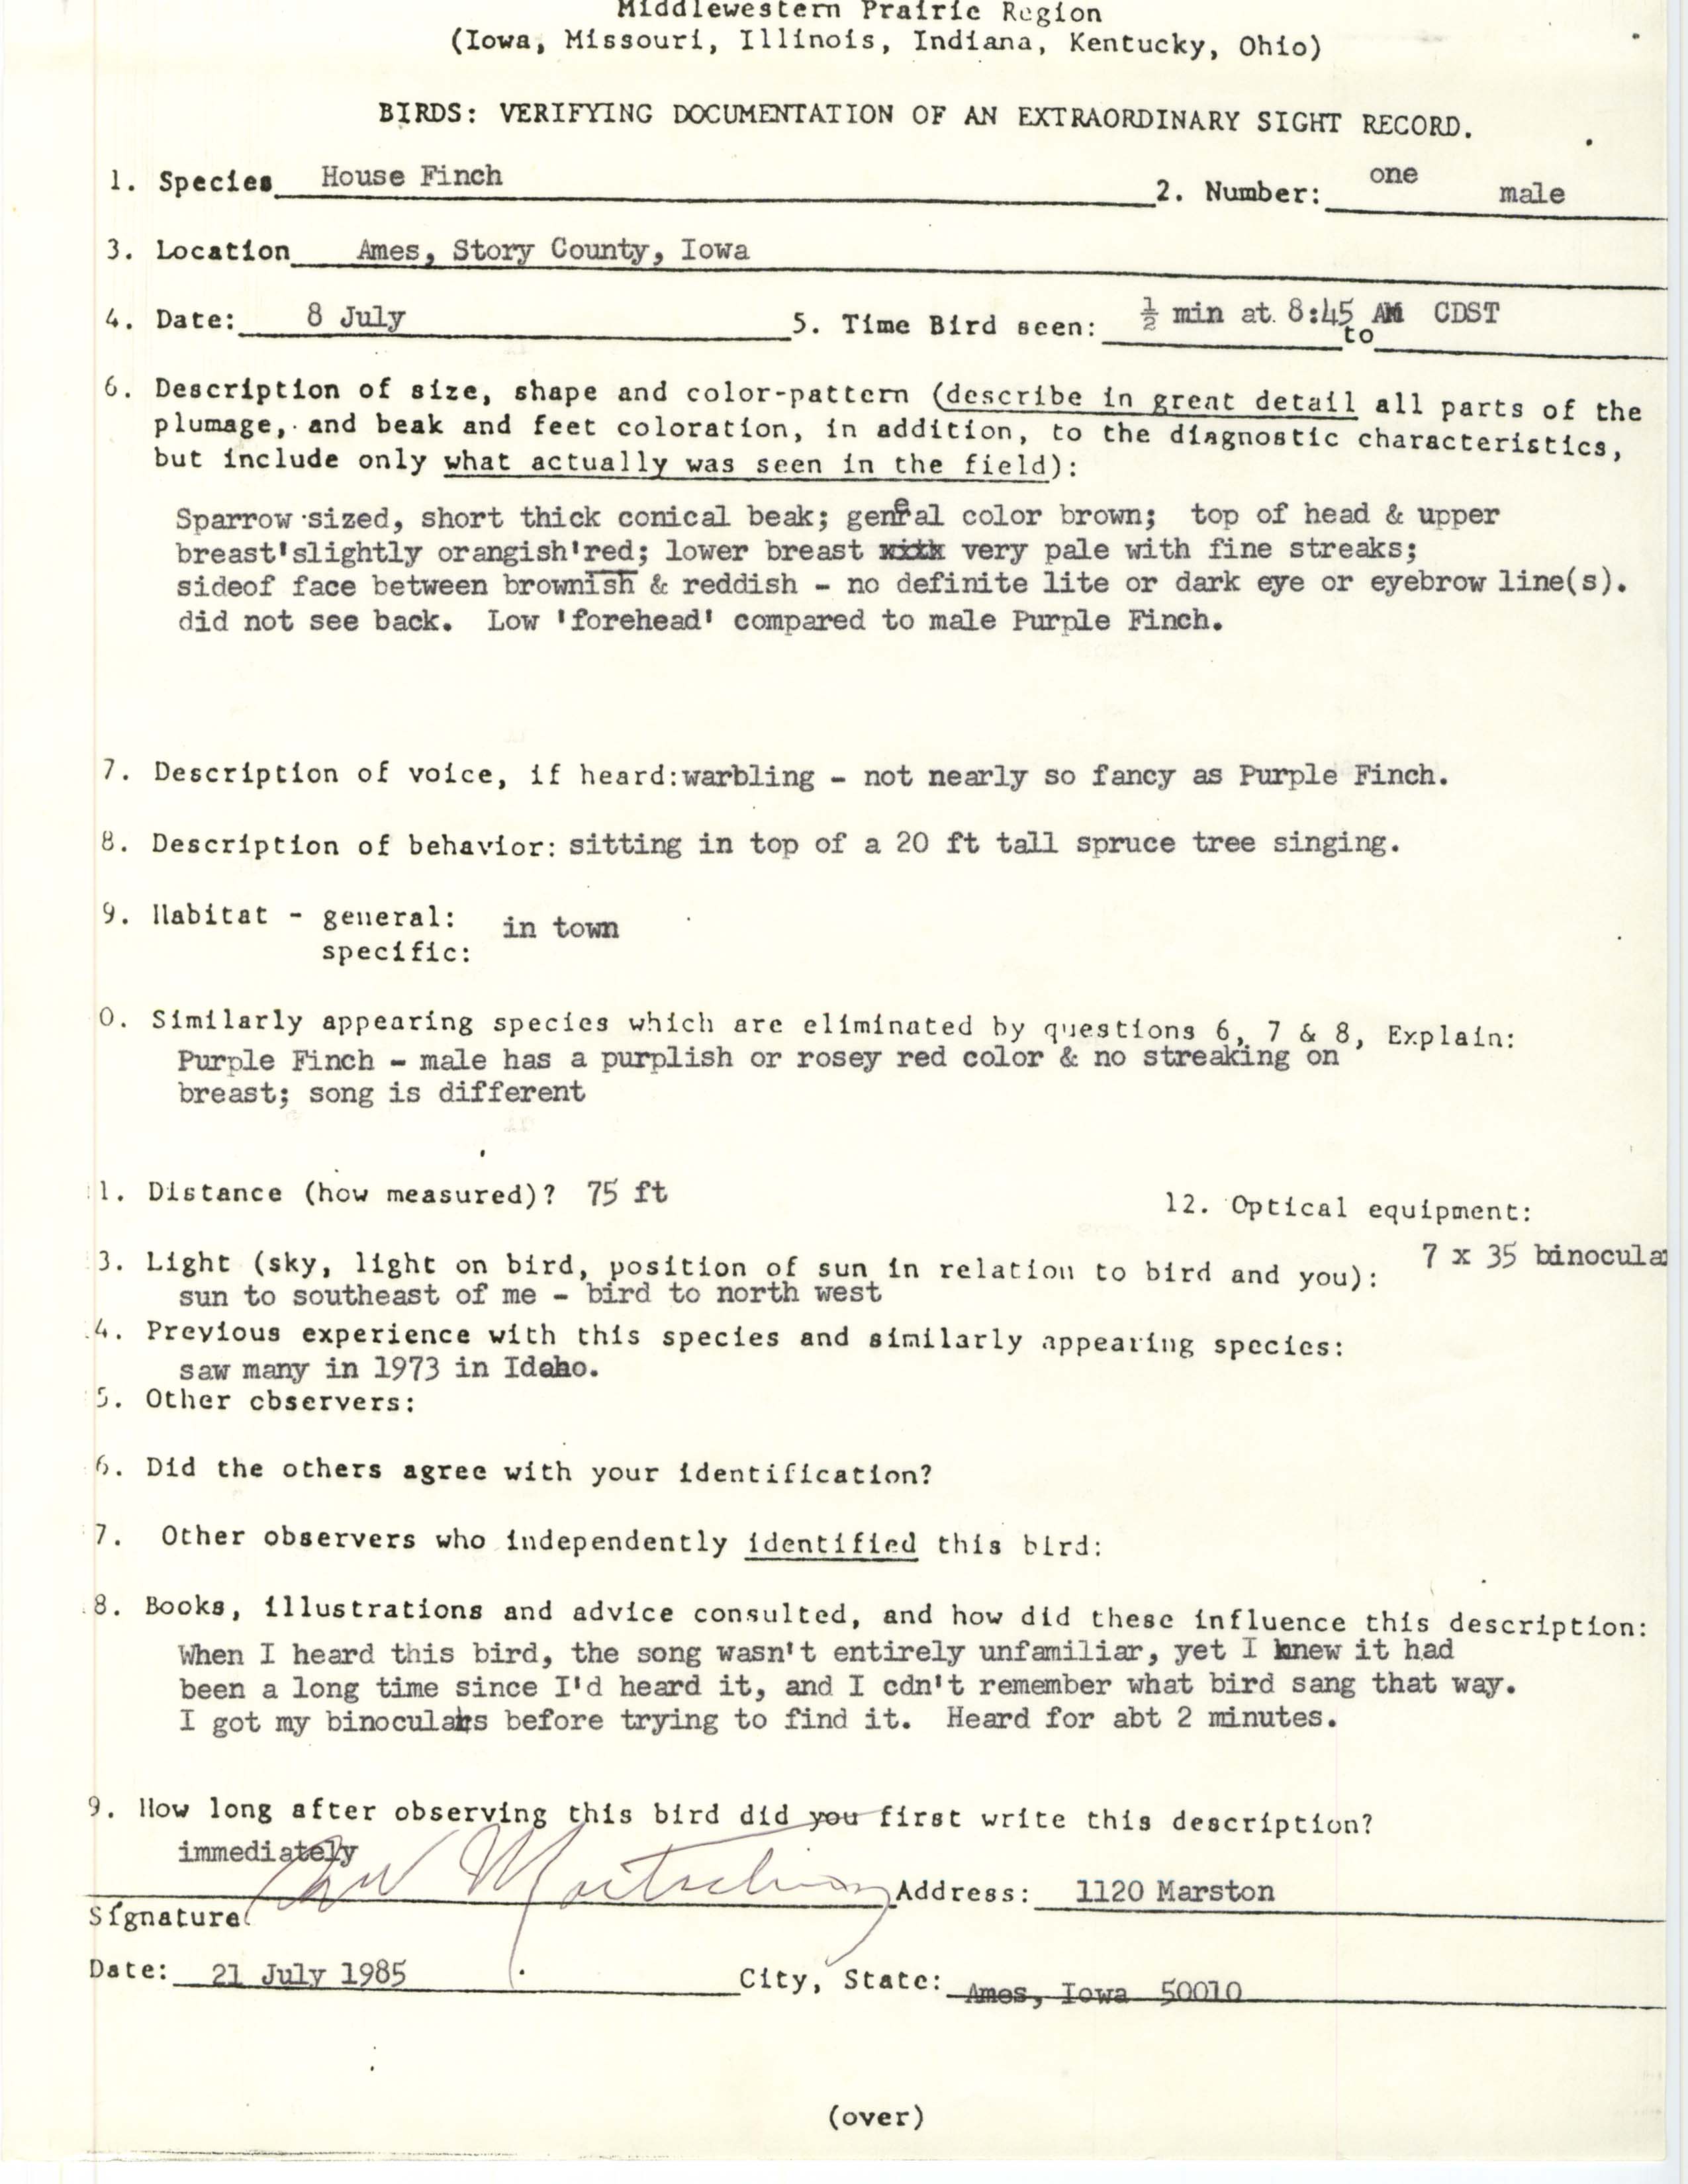 Rare bird documentation form for House Finch at Ames, 1985